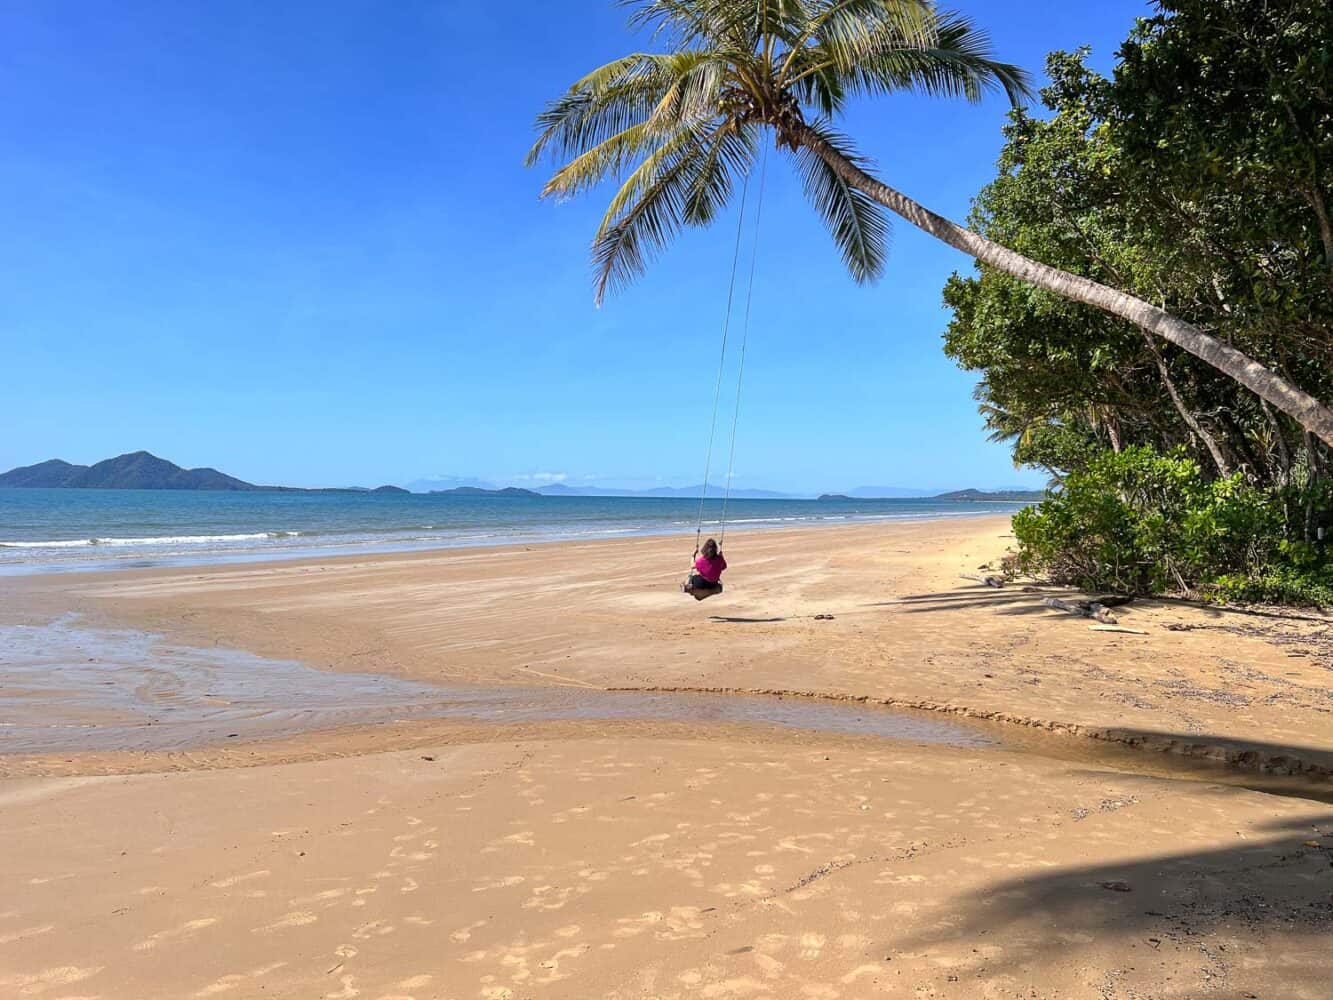 Erin on a swing attached to a palm tree on Mission Beach, North Queensland, Australia